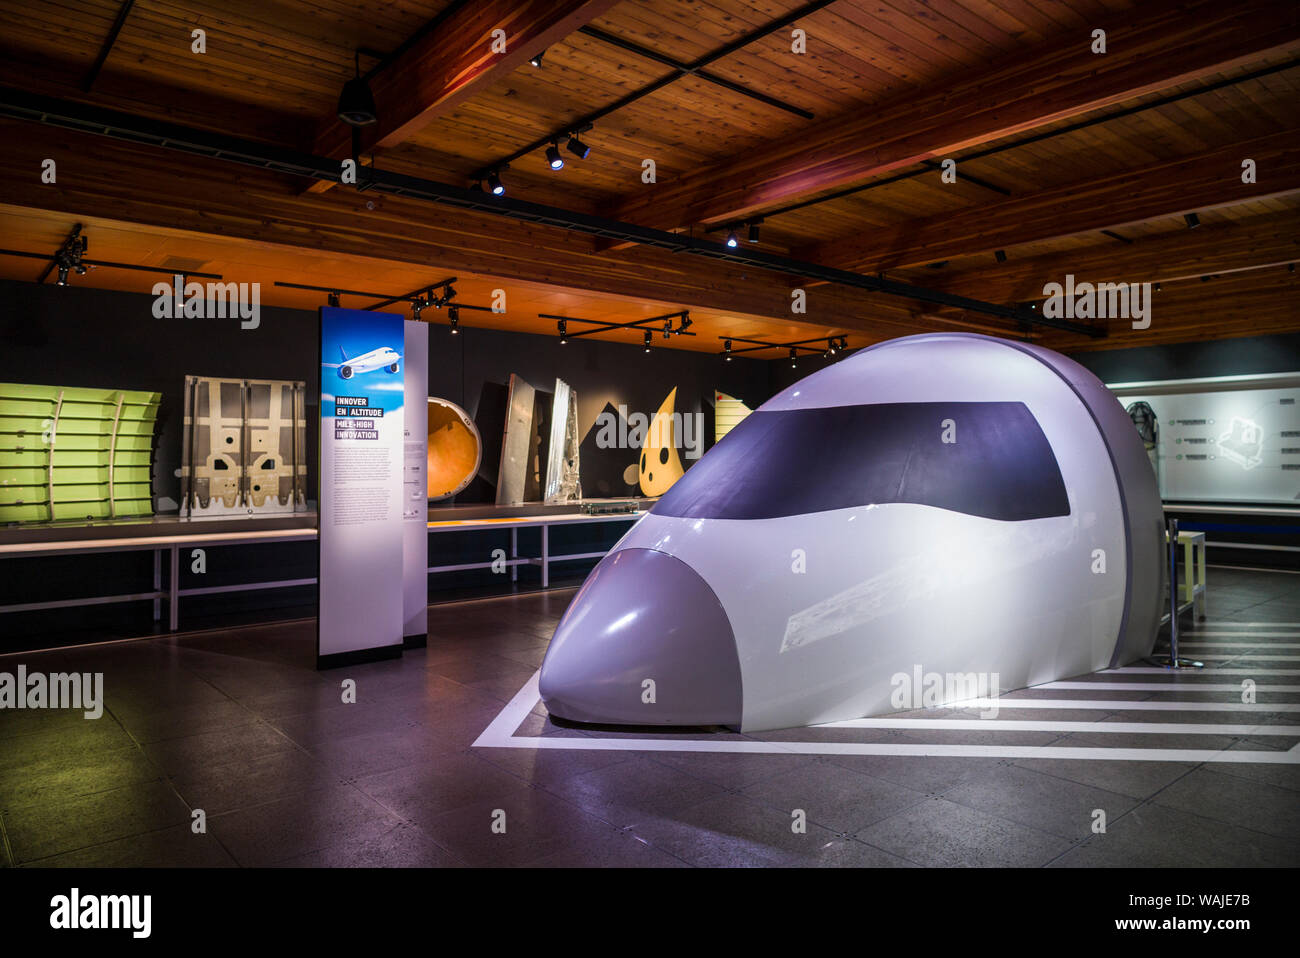 Canada, Quebec, Valcourt. Musee Joseph-Armand Bombardier, museum dedicated to the inventor of the modern snowmobile, Bombardier jet aircraft designs Stock Photo